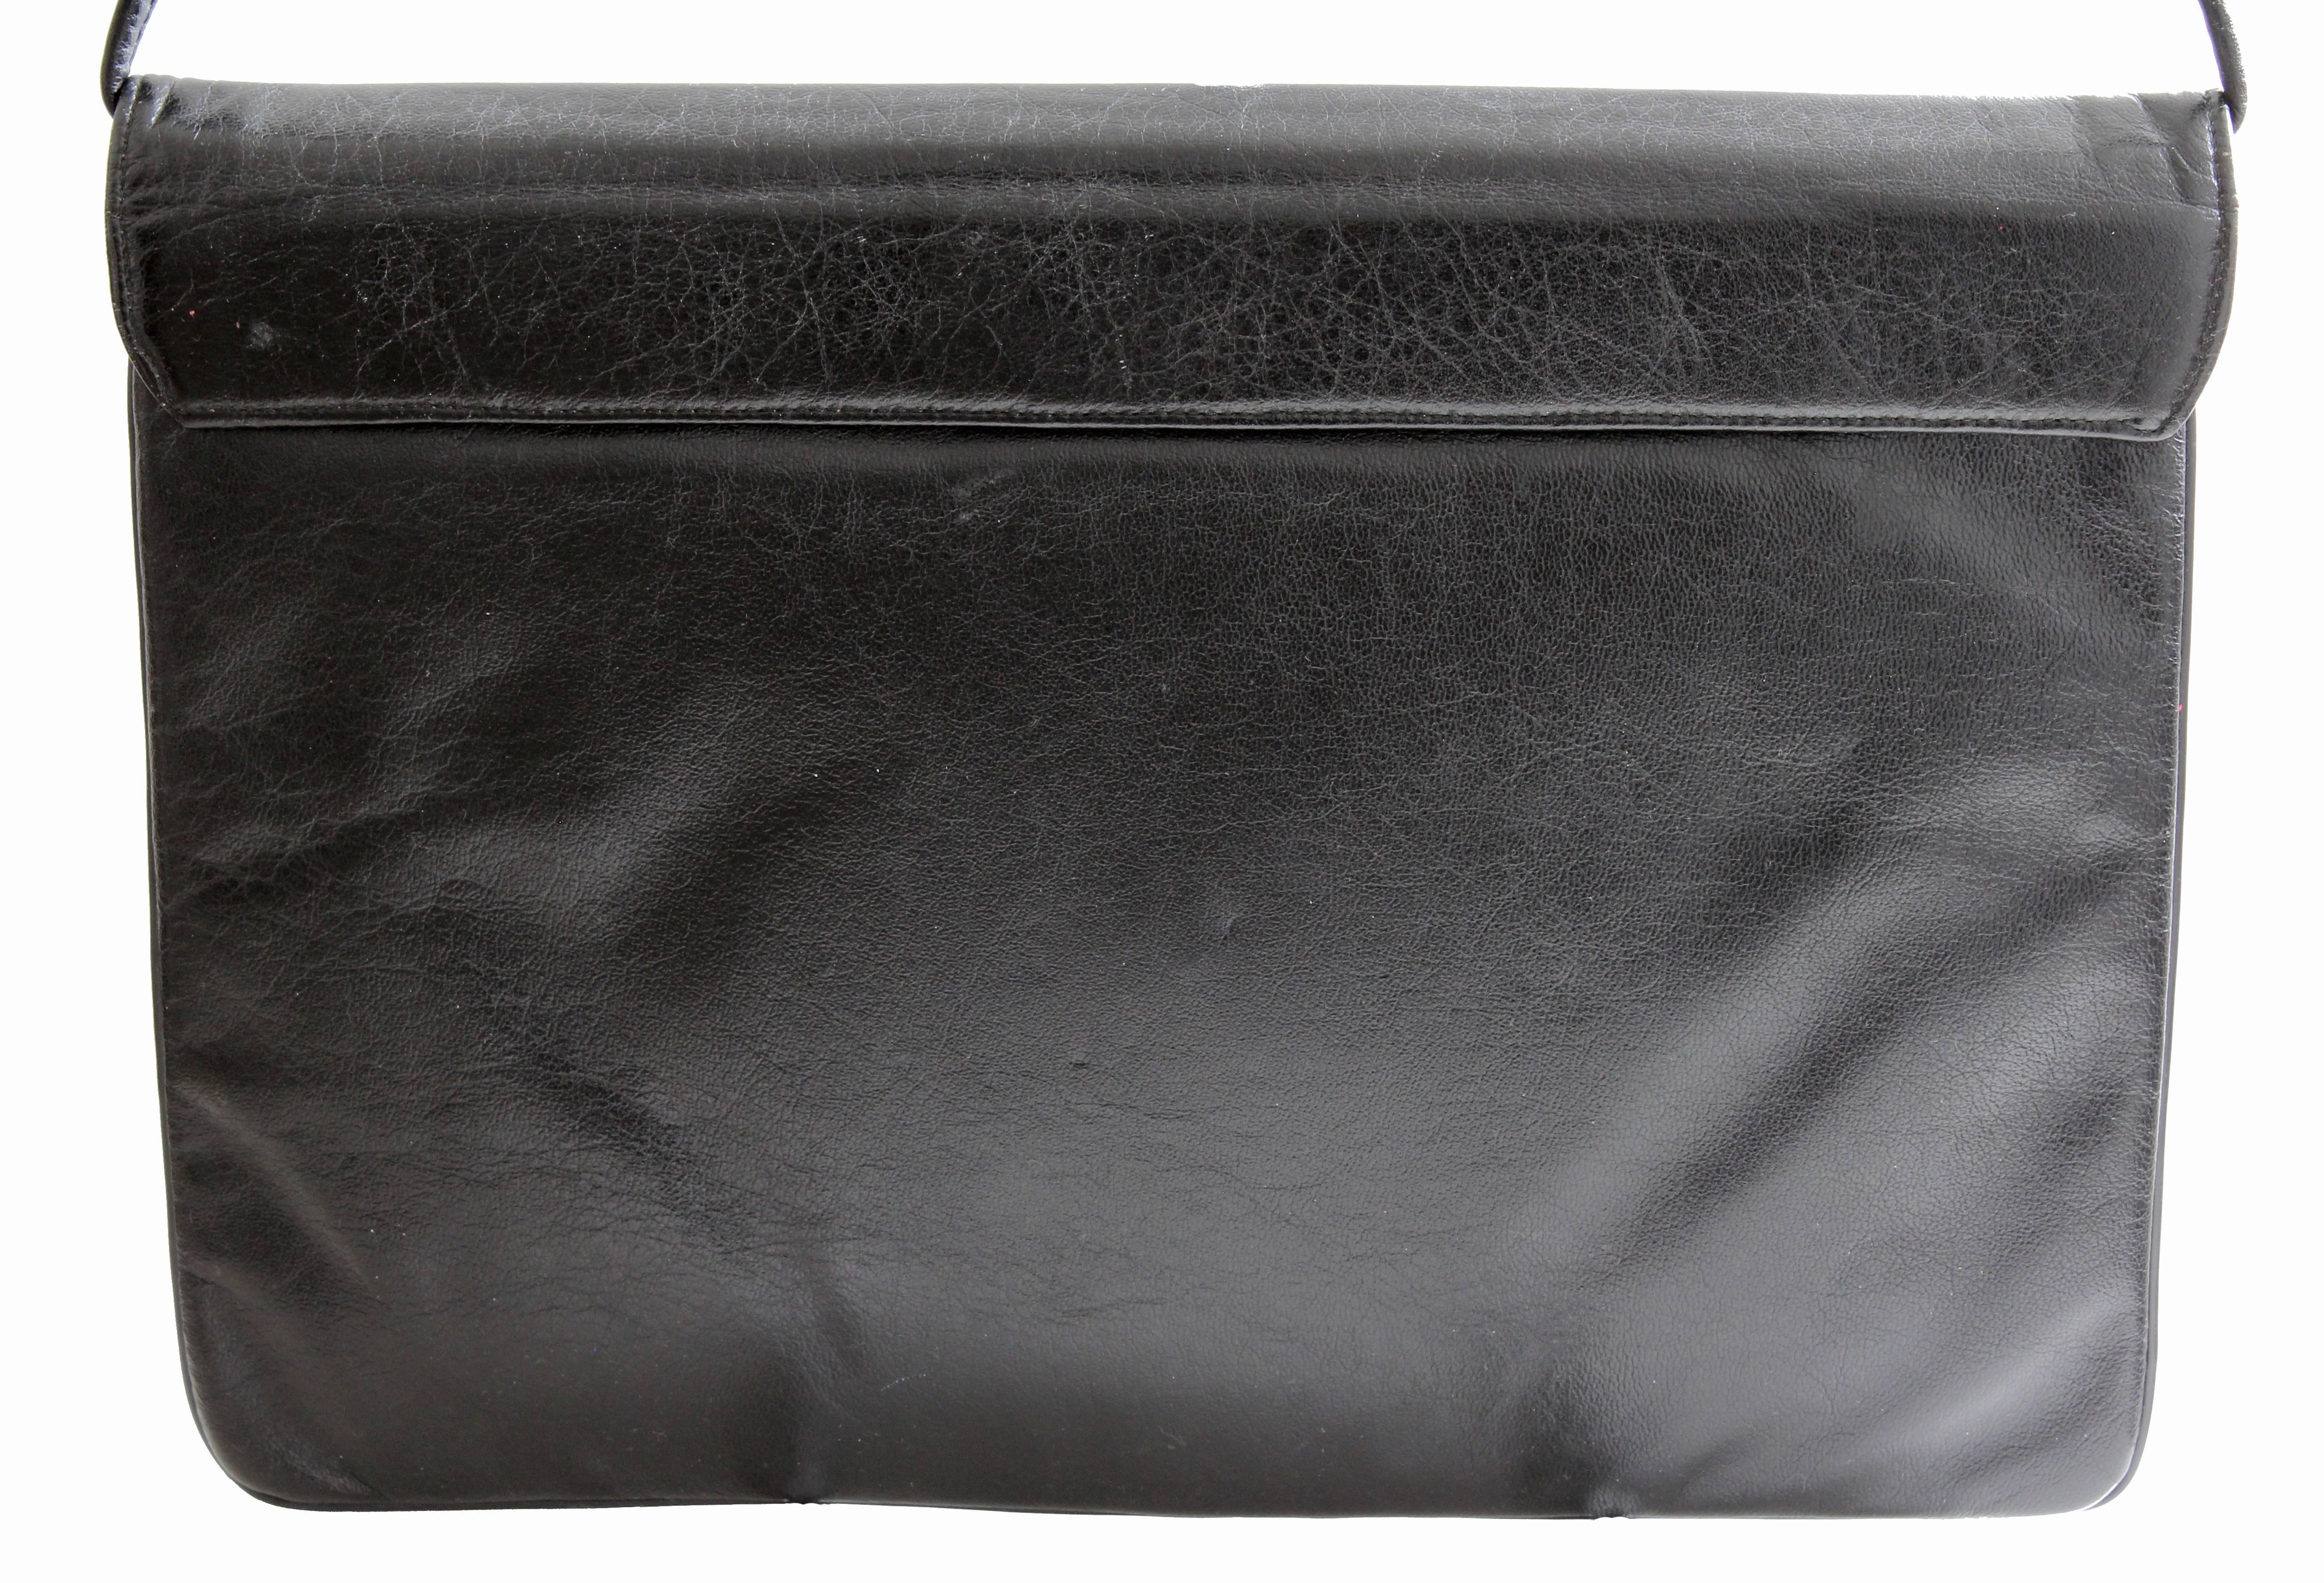 Women's Rosenfeld Black Leather Envelope Clutch/Shoulder Bag with Abstract Clasp, 1960s